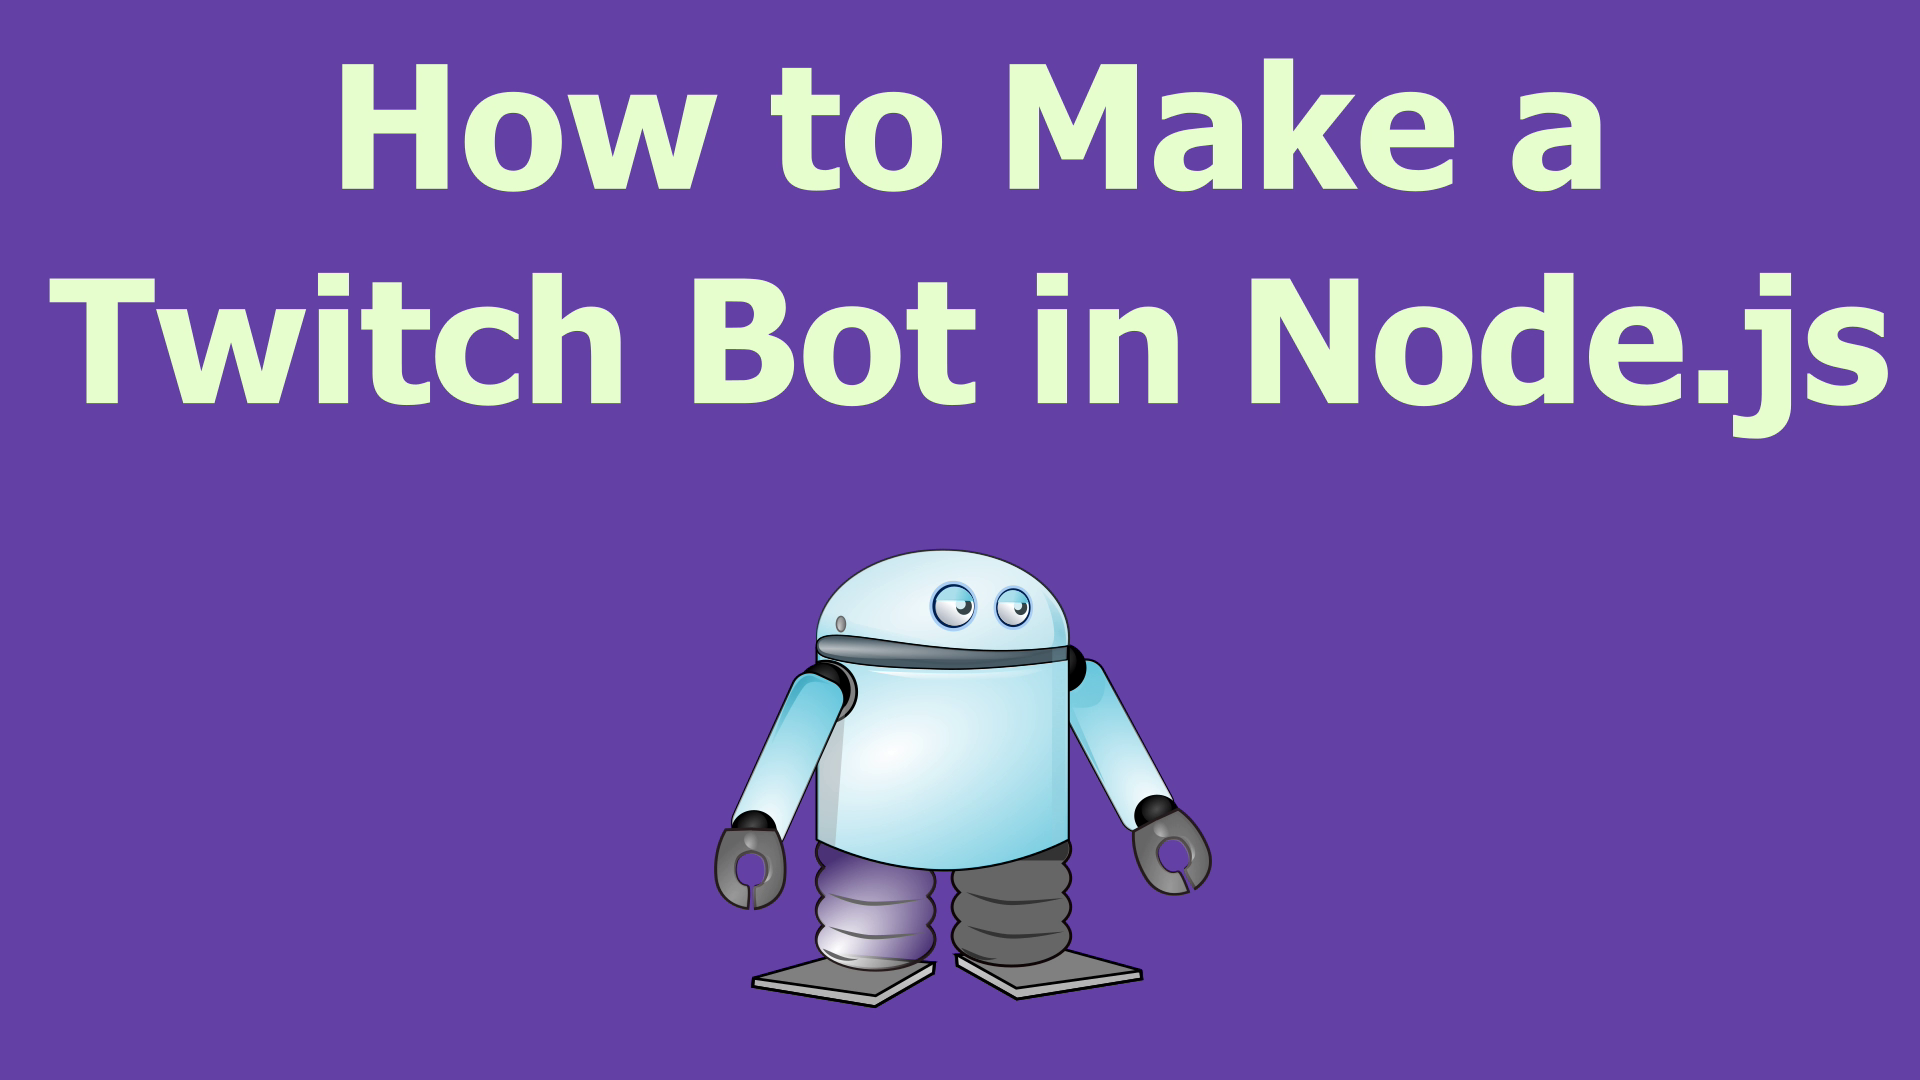 How to Make a Twitch Bot Node